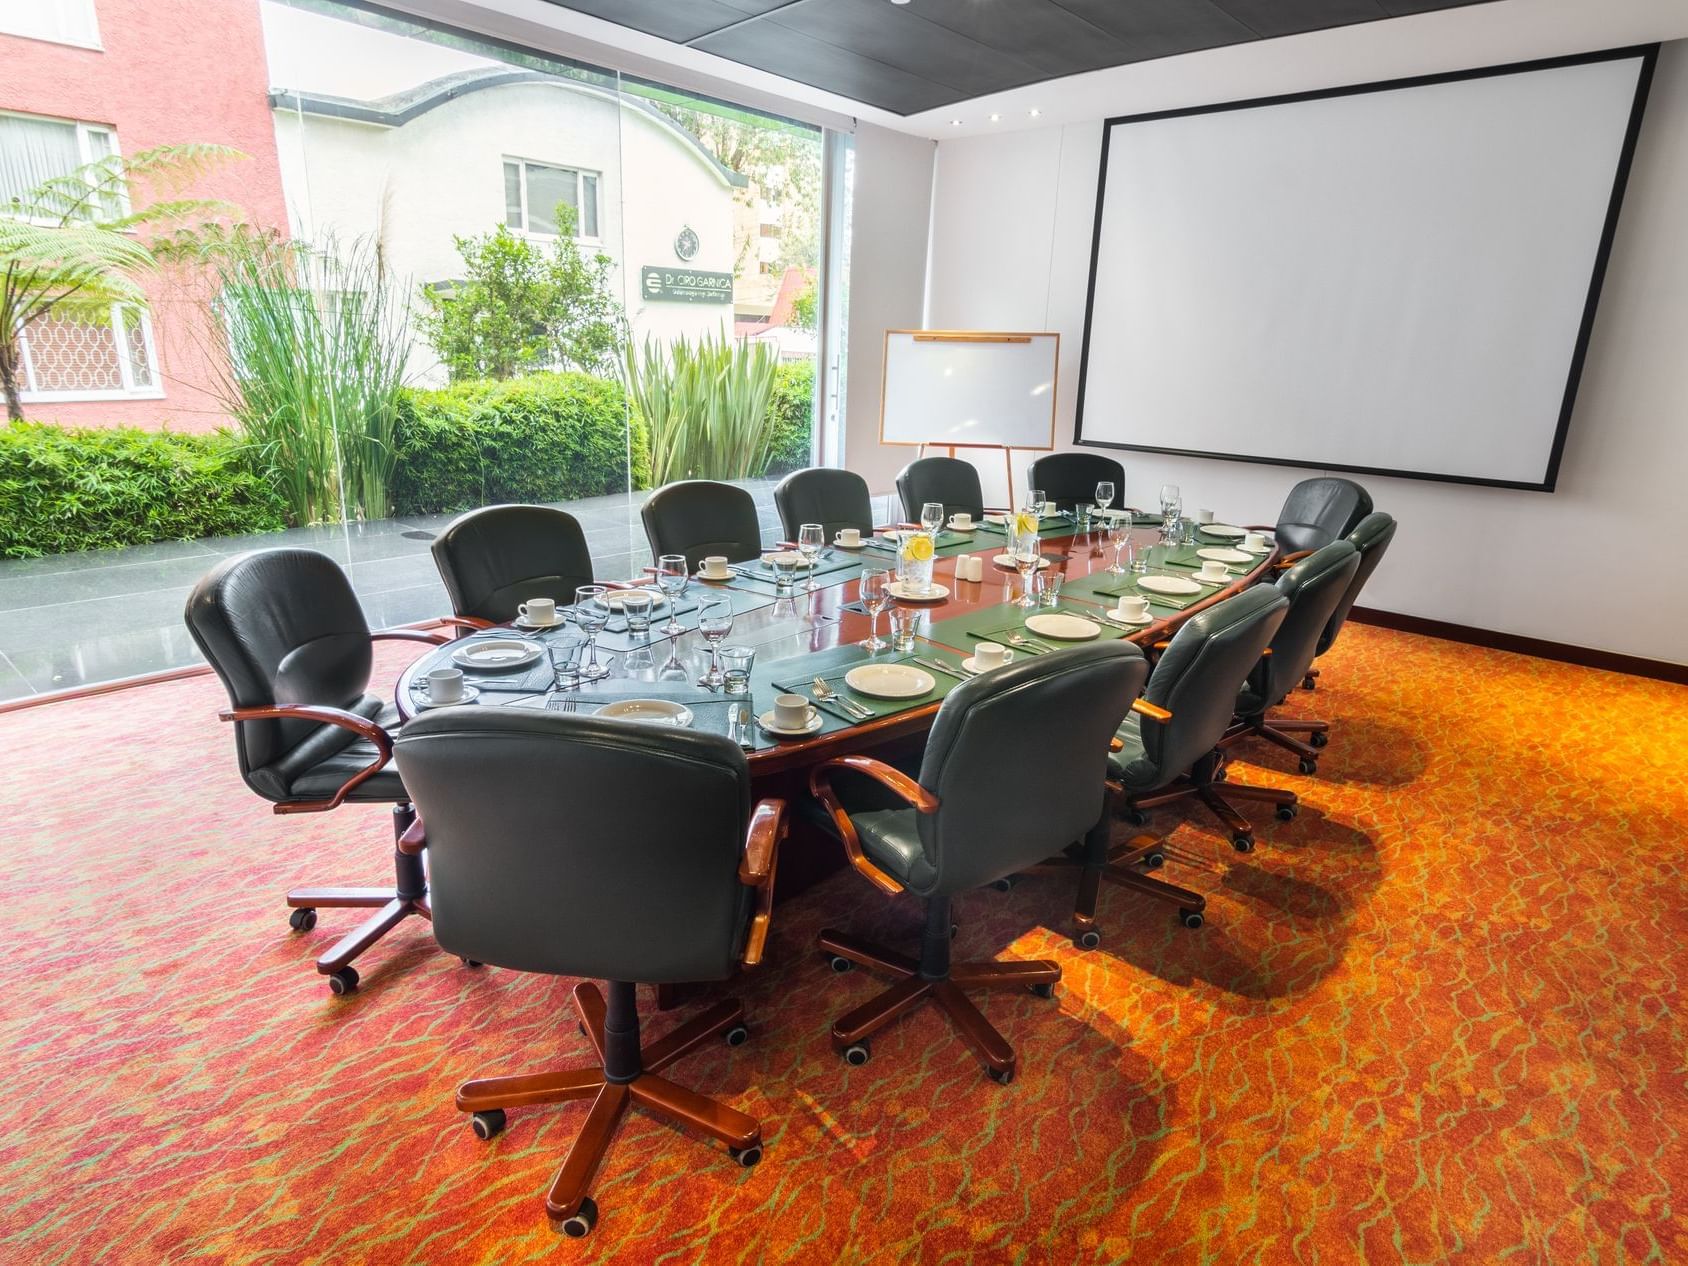 The arranged Dakota meeting room with black chairs and a table